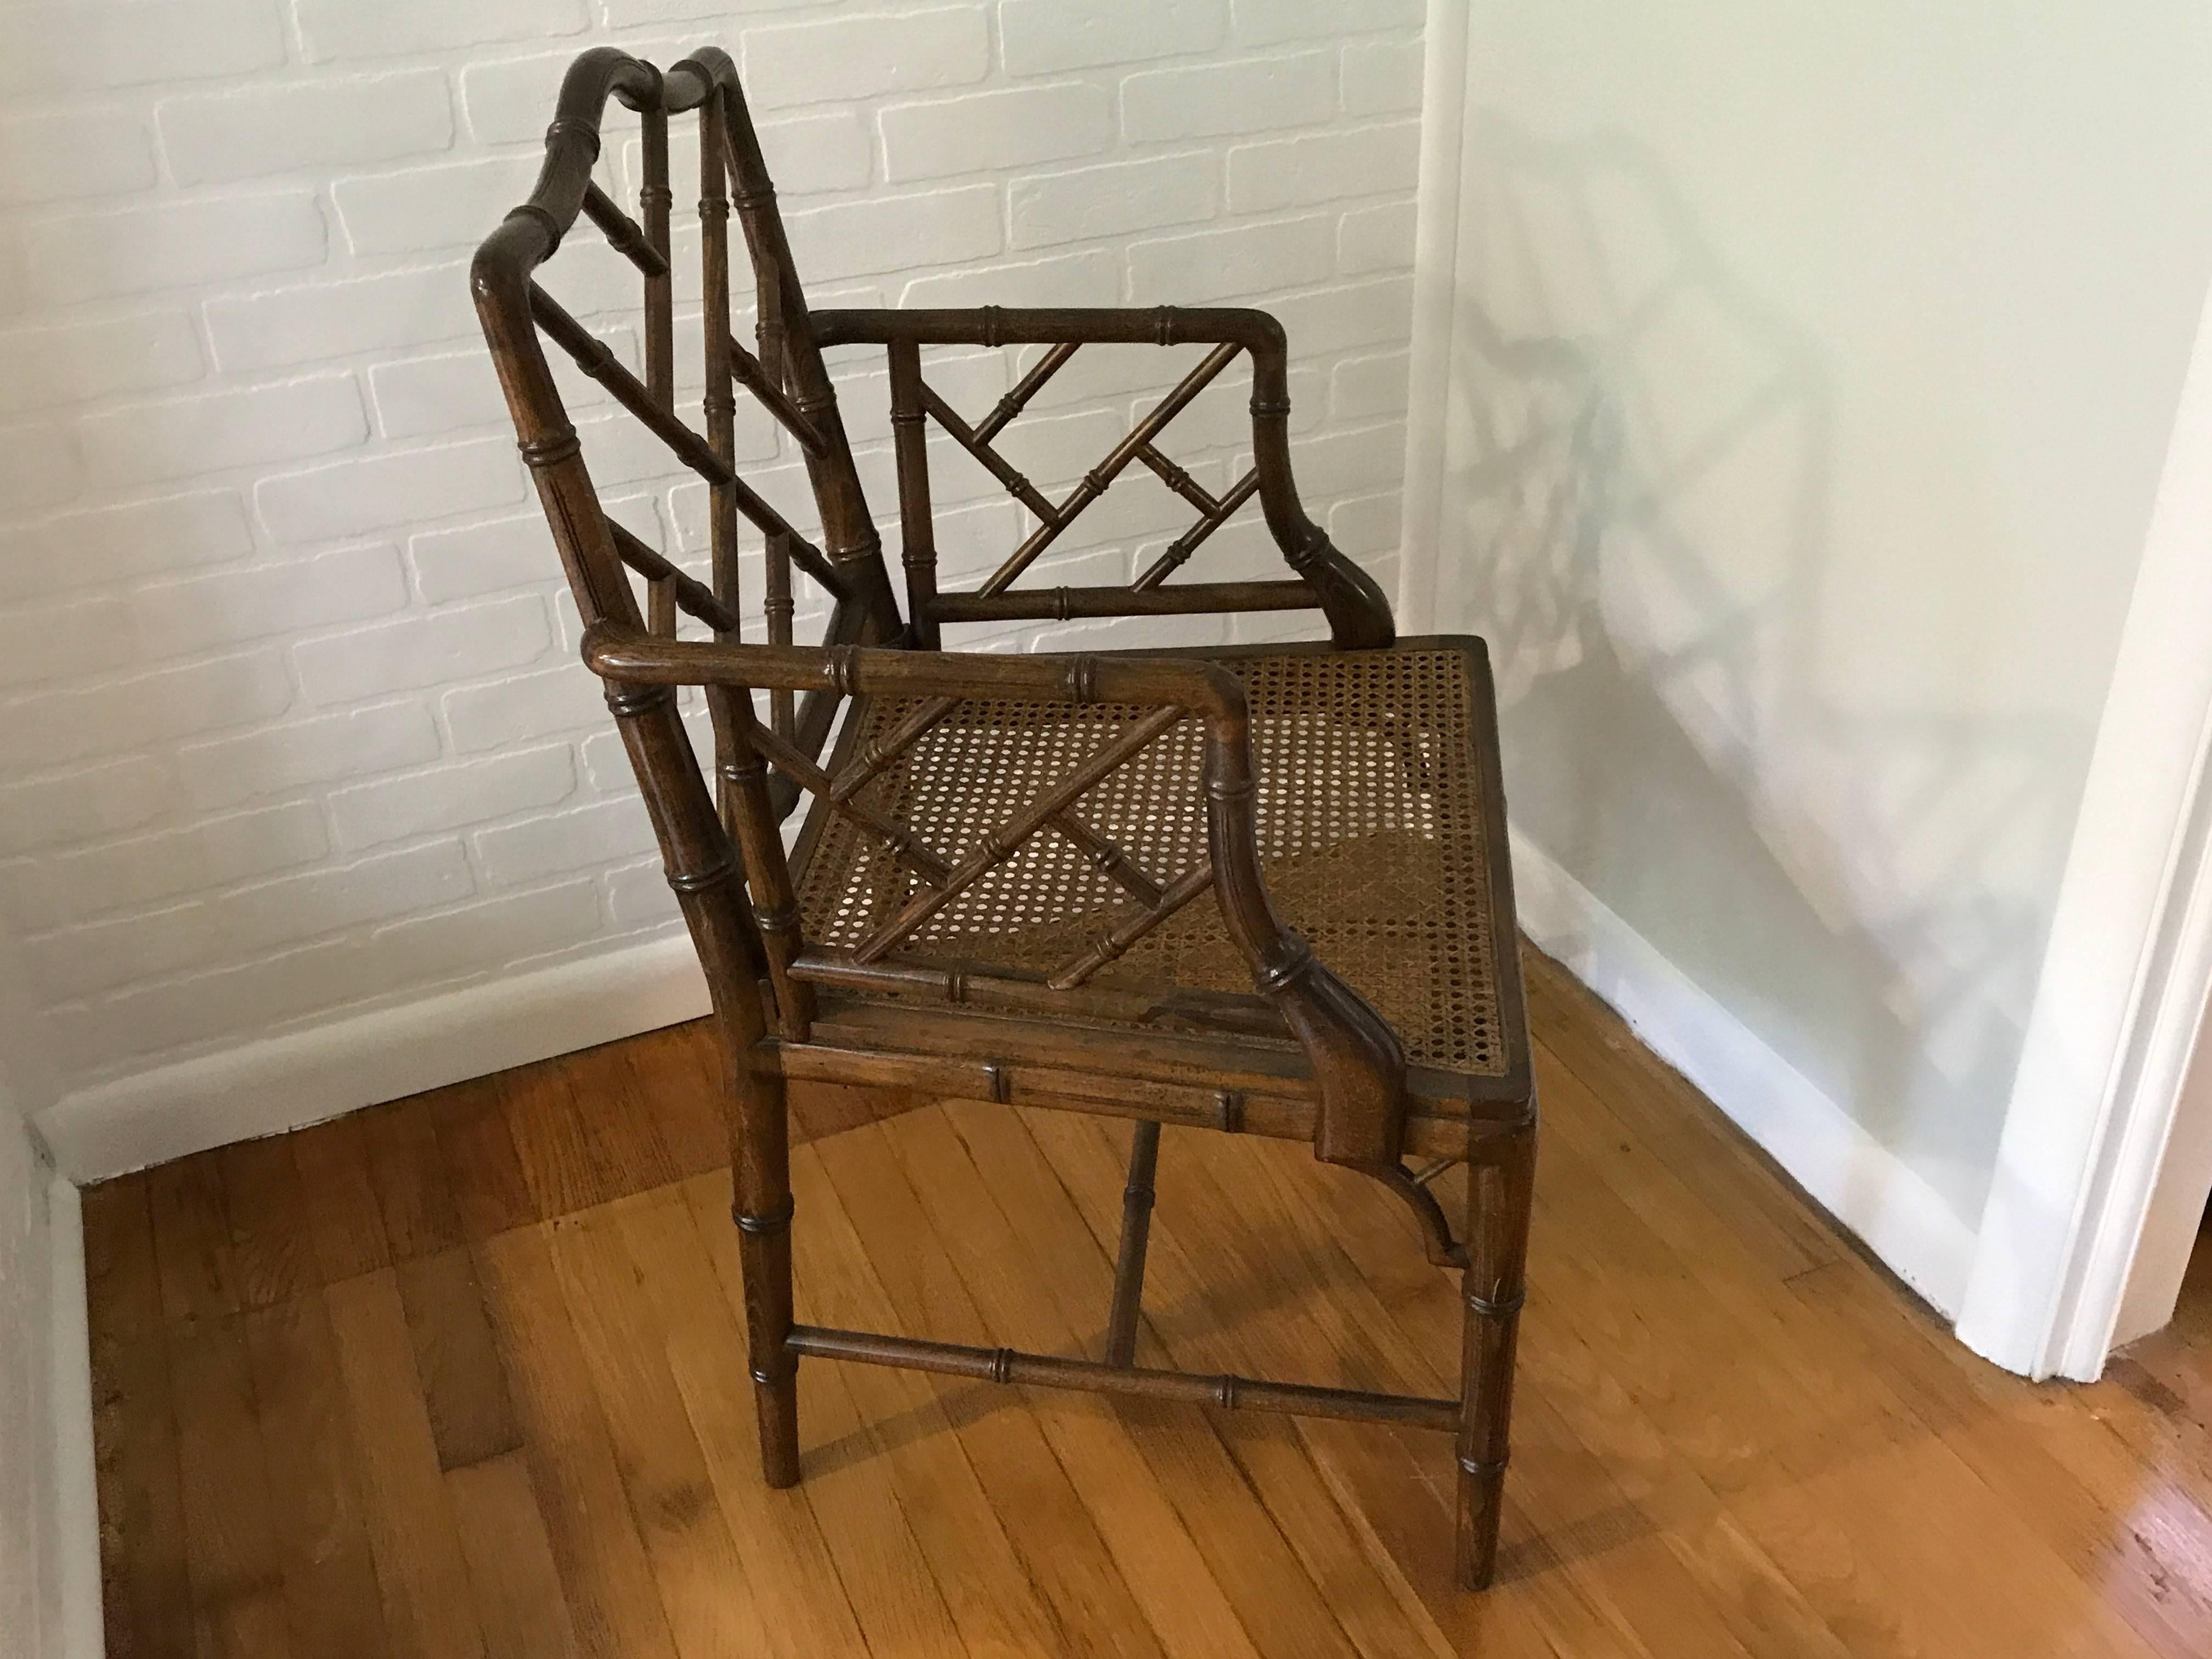 Offered is a stunning, 1960s faux bamboo Chinese Chippendale side chair. Includes cushion, though needs to be reupholstered (see last two photos). Excellent condition, caning does not sag or have any breaks.